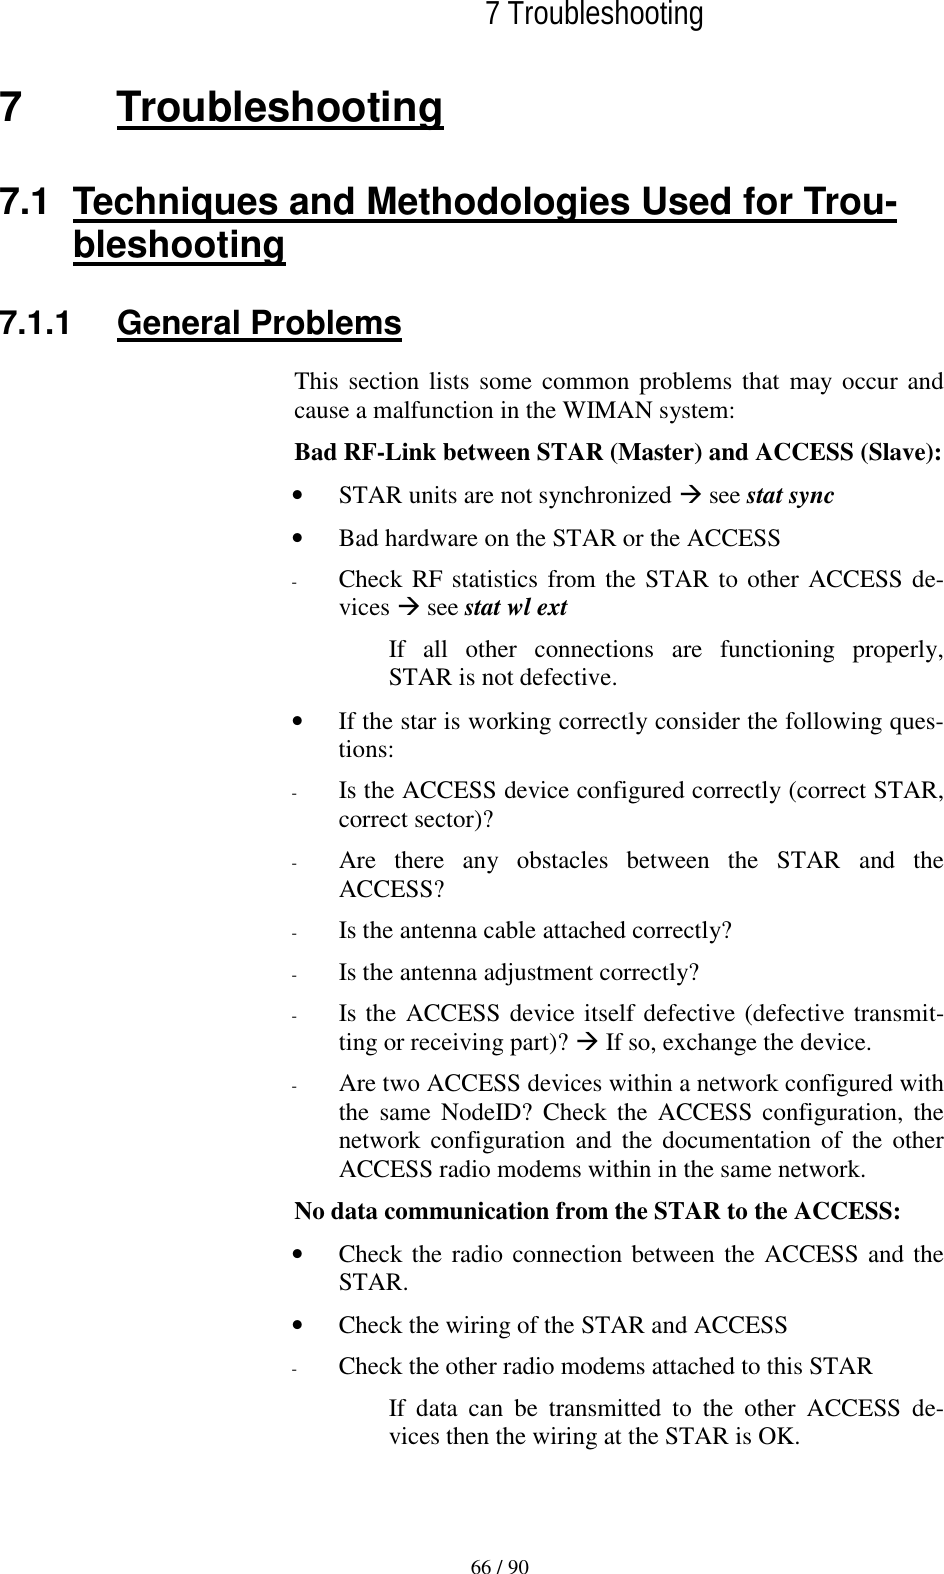   7 Troubleshooting  66 / 90 7 Troubleshooting 7.1  Techniques and Methodologies Used for Trou-bleshooting 7.1.1 General Problems This section lists some common problems that may occur and cause a malfunction in the WIMAN system: Bad RF-Link between STAR (Master) and ACCESS (Slave): •  STAR units are not synchronized ! see stat sync •  Bad hardware on the STAR or the ACCESS -  Check RF statistics from the STAR to other ACCESS de-vices ! see stat wl ext If all other connections are functioning properly, STAR is not defective. •  If the star is working correctly consider the following ques-tions: -  Is the ACCESS device configured correctly (correct STAR, correct sector)? -  Are there any obstacles between the STAR and the ACCESS? -  Is the antenna cable attached correctly? -  Is the antenna adjustment correctly? -  Is the ACCESS device itself defective (defective transmit-ting or receiving part)? ! If so, exchange the device. -  Are two ACCESS devices within a network configured with the same NodeID? Check the ACCESS configuration, the network configuration and the documentation of the other  ACCESS radio modems within in the same network. No data communication from the STAR to the ACCESS: •  Check the radio connection between the ACCESS and the STAR. •  Check the wiring of the STAR and ACCESS -  Check the other radio modems attached to this STAR If data can be transmitted to the other ACCESS de-vices then the wiring at the STAR is OK. 